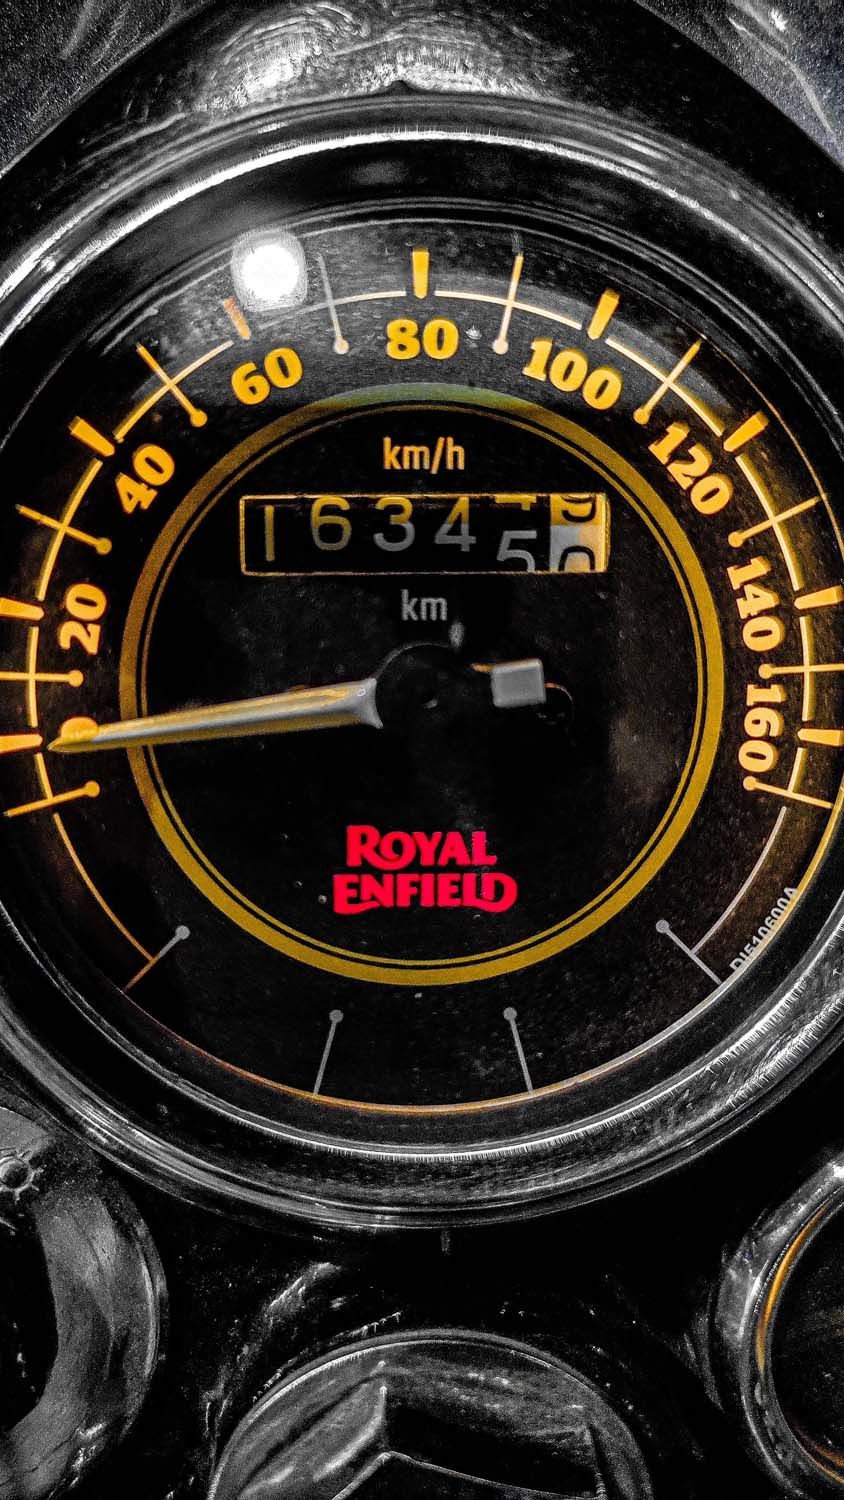 Royal Enfield Meter Console IPhone Wallpaper HD  IPhone Wallpapers